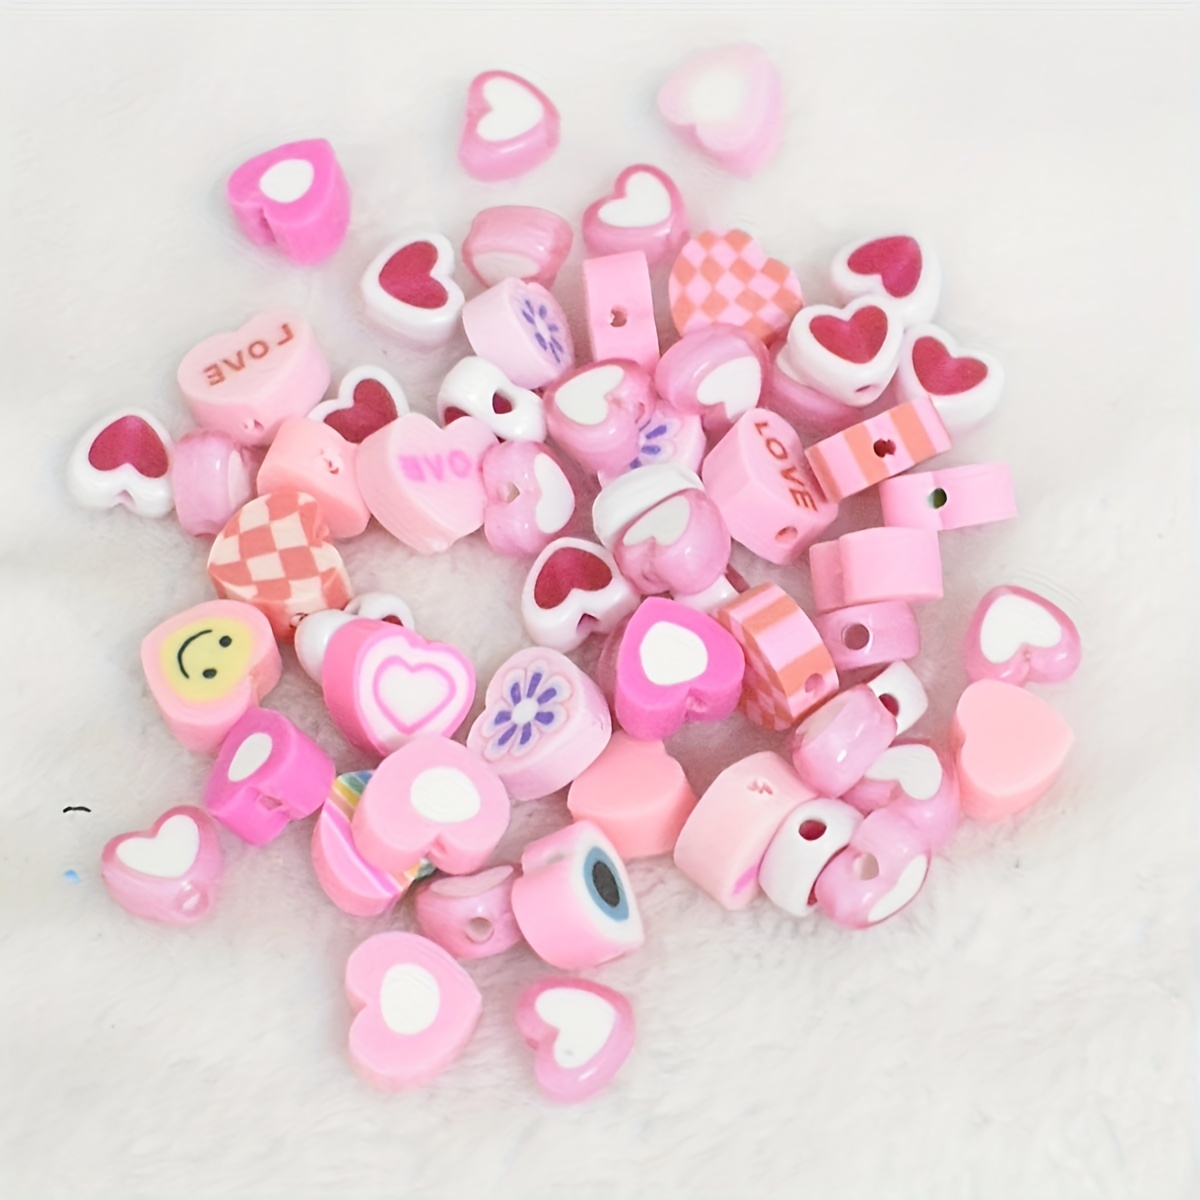 DIY Bracelet Making Kit About 654 Pieces 0.8mm Pink Acrylic Beads Plastic  Beads Mixed Style Elastic Thread 1 Roll For Making Bracelets And Necklaces 